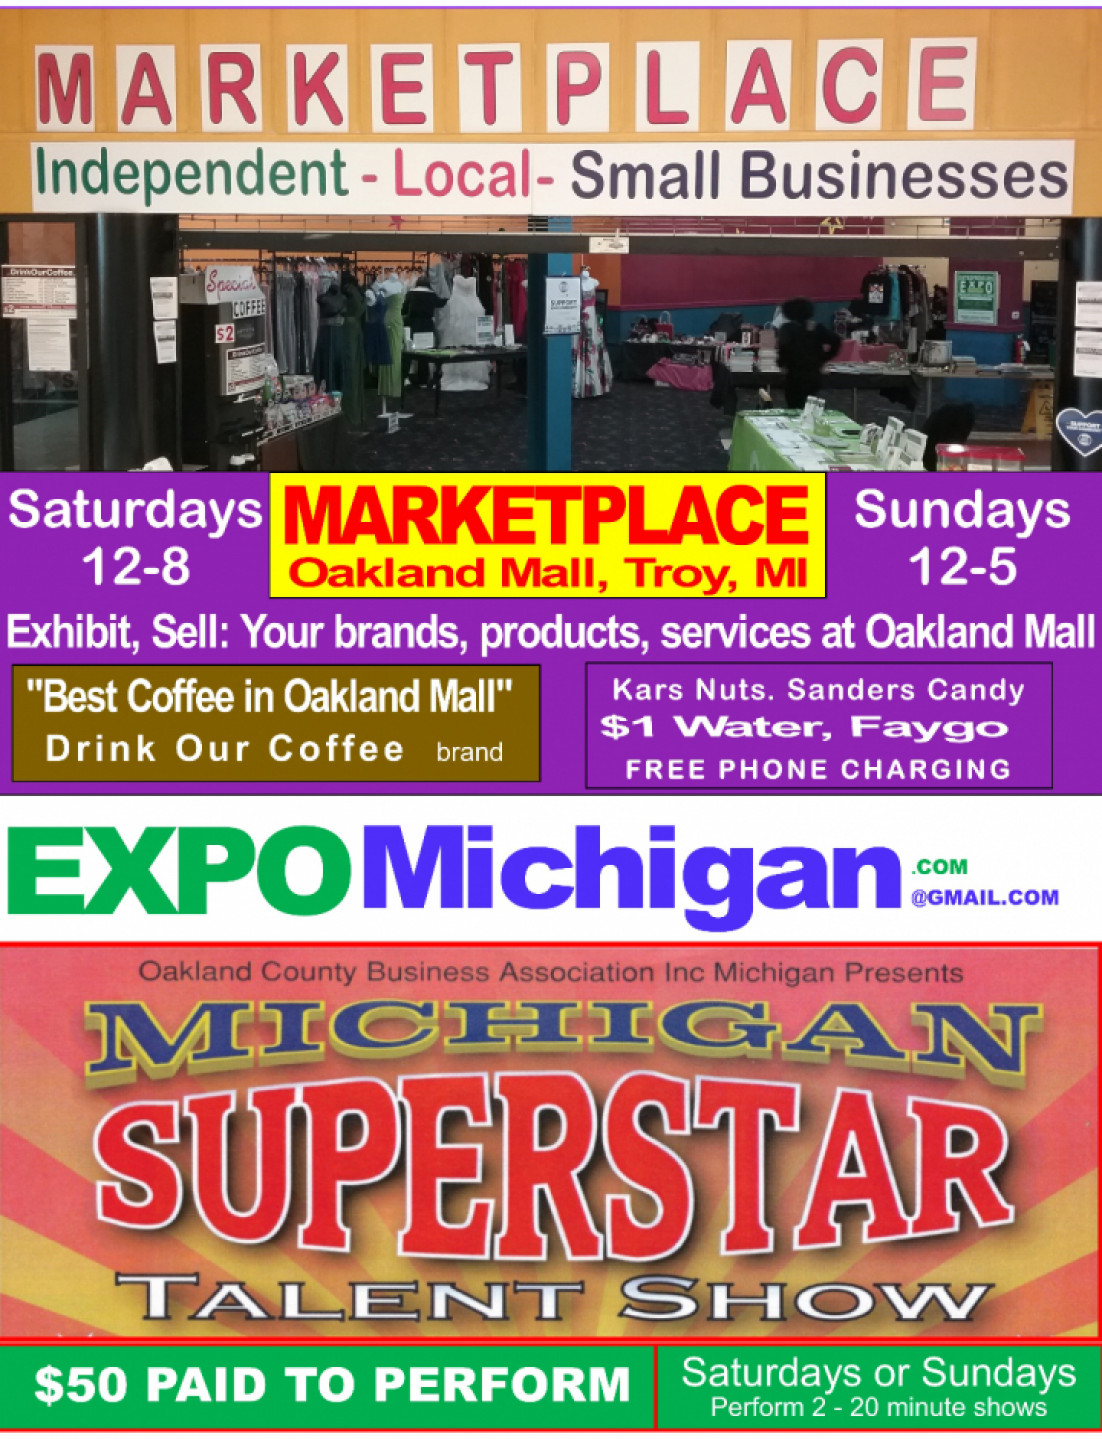 Small Business MARKETPLACE at Oakland Mall, Troy, MI